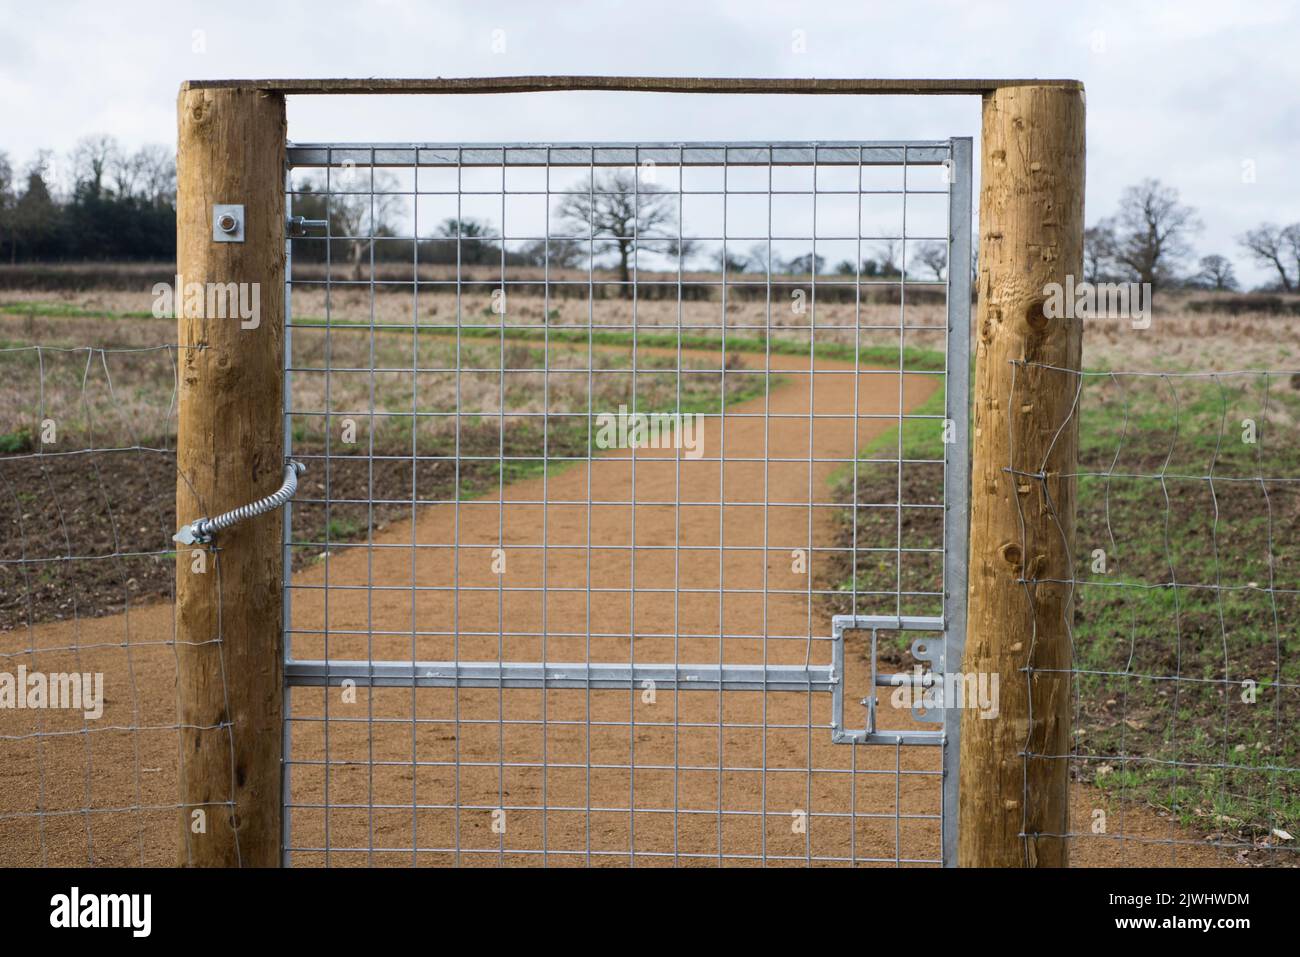 A brand new galvanised steel gate with wooden fence posts and new gravel walking pathway beyond it in a rural area of north London England UK Stock Photo